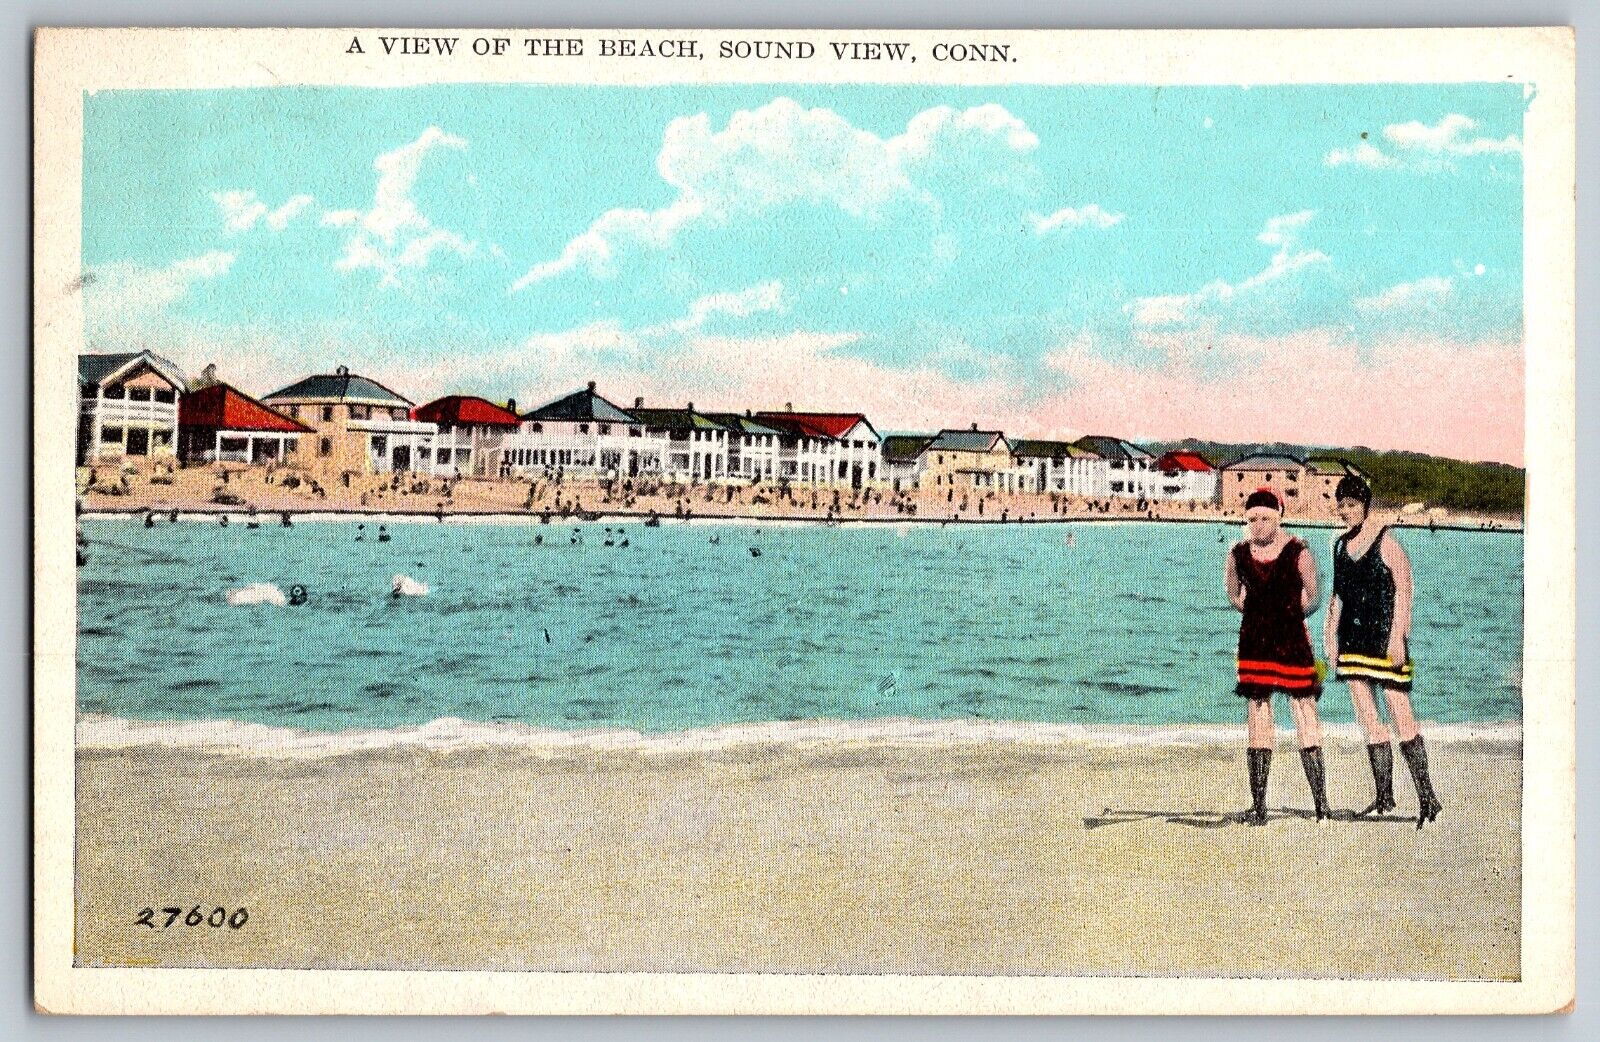 Sound View, Connecticut CT - A View of the Beach - Vintage Postcard - Posted